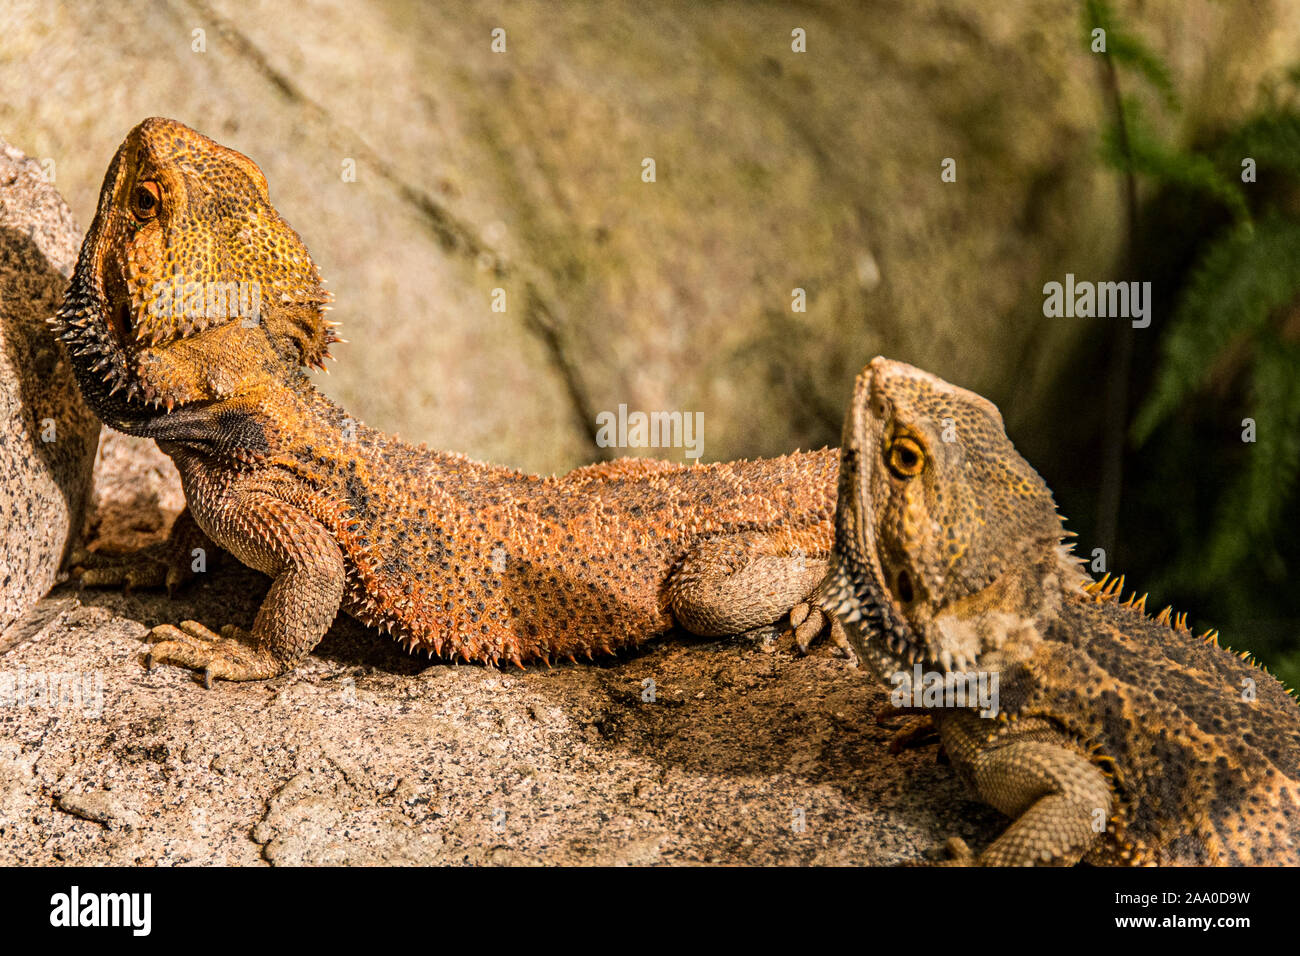 Close-up of two bearded dragons sunbathing on a rock. Stock Photo